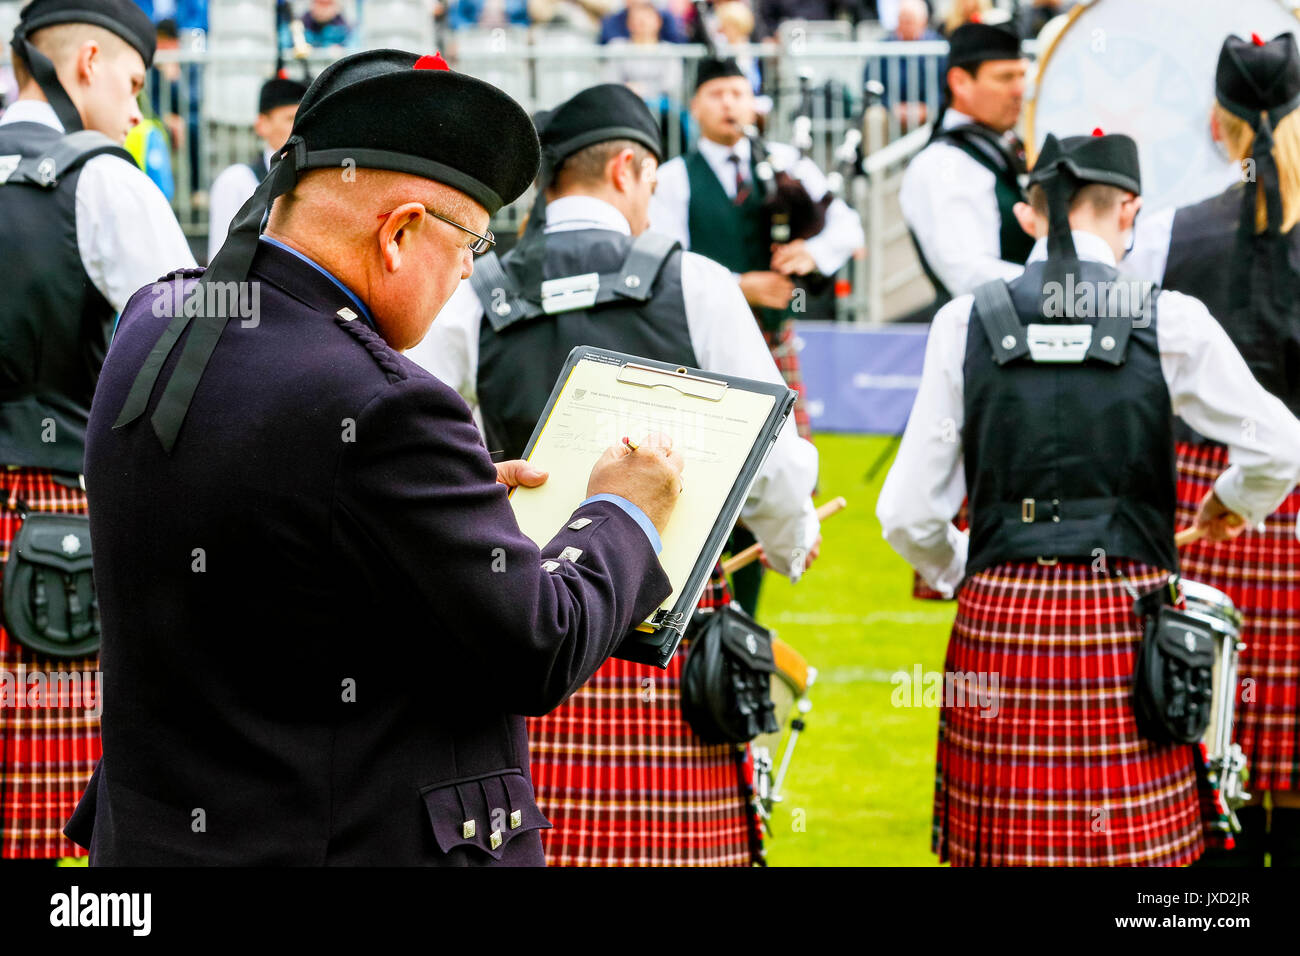 Pipe band adjudicator making up the comments and scores while listening to the band play, Scotland Stock Photo